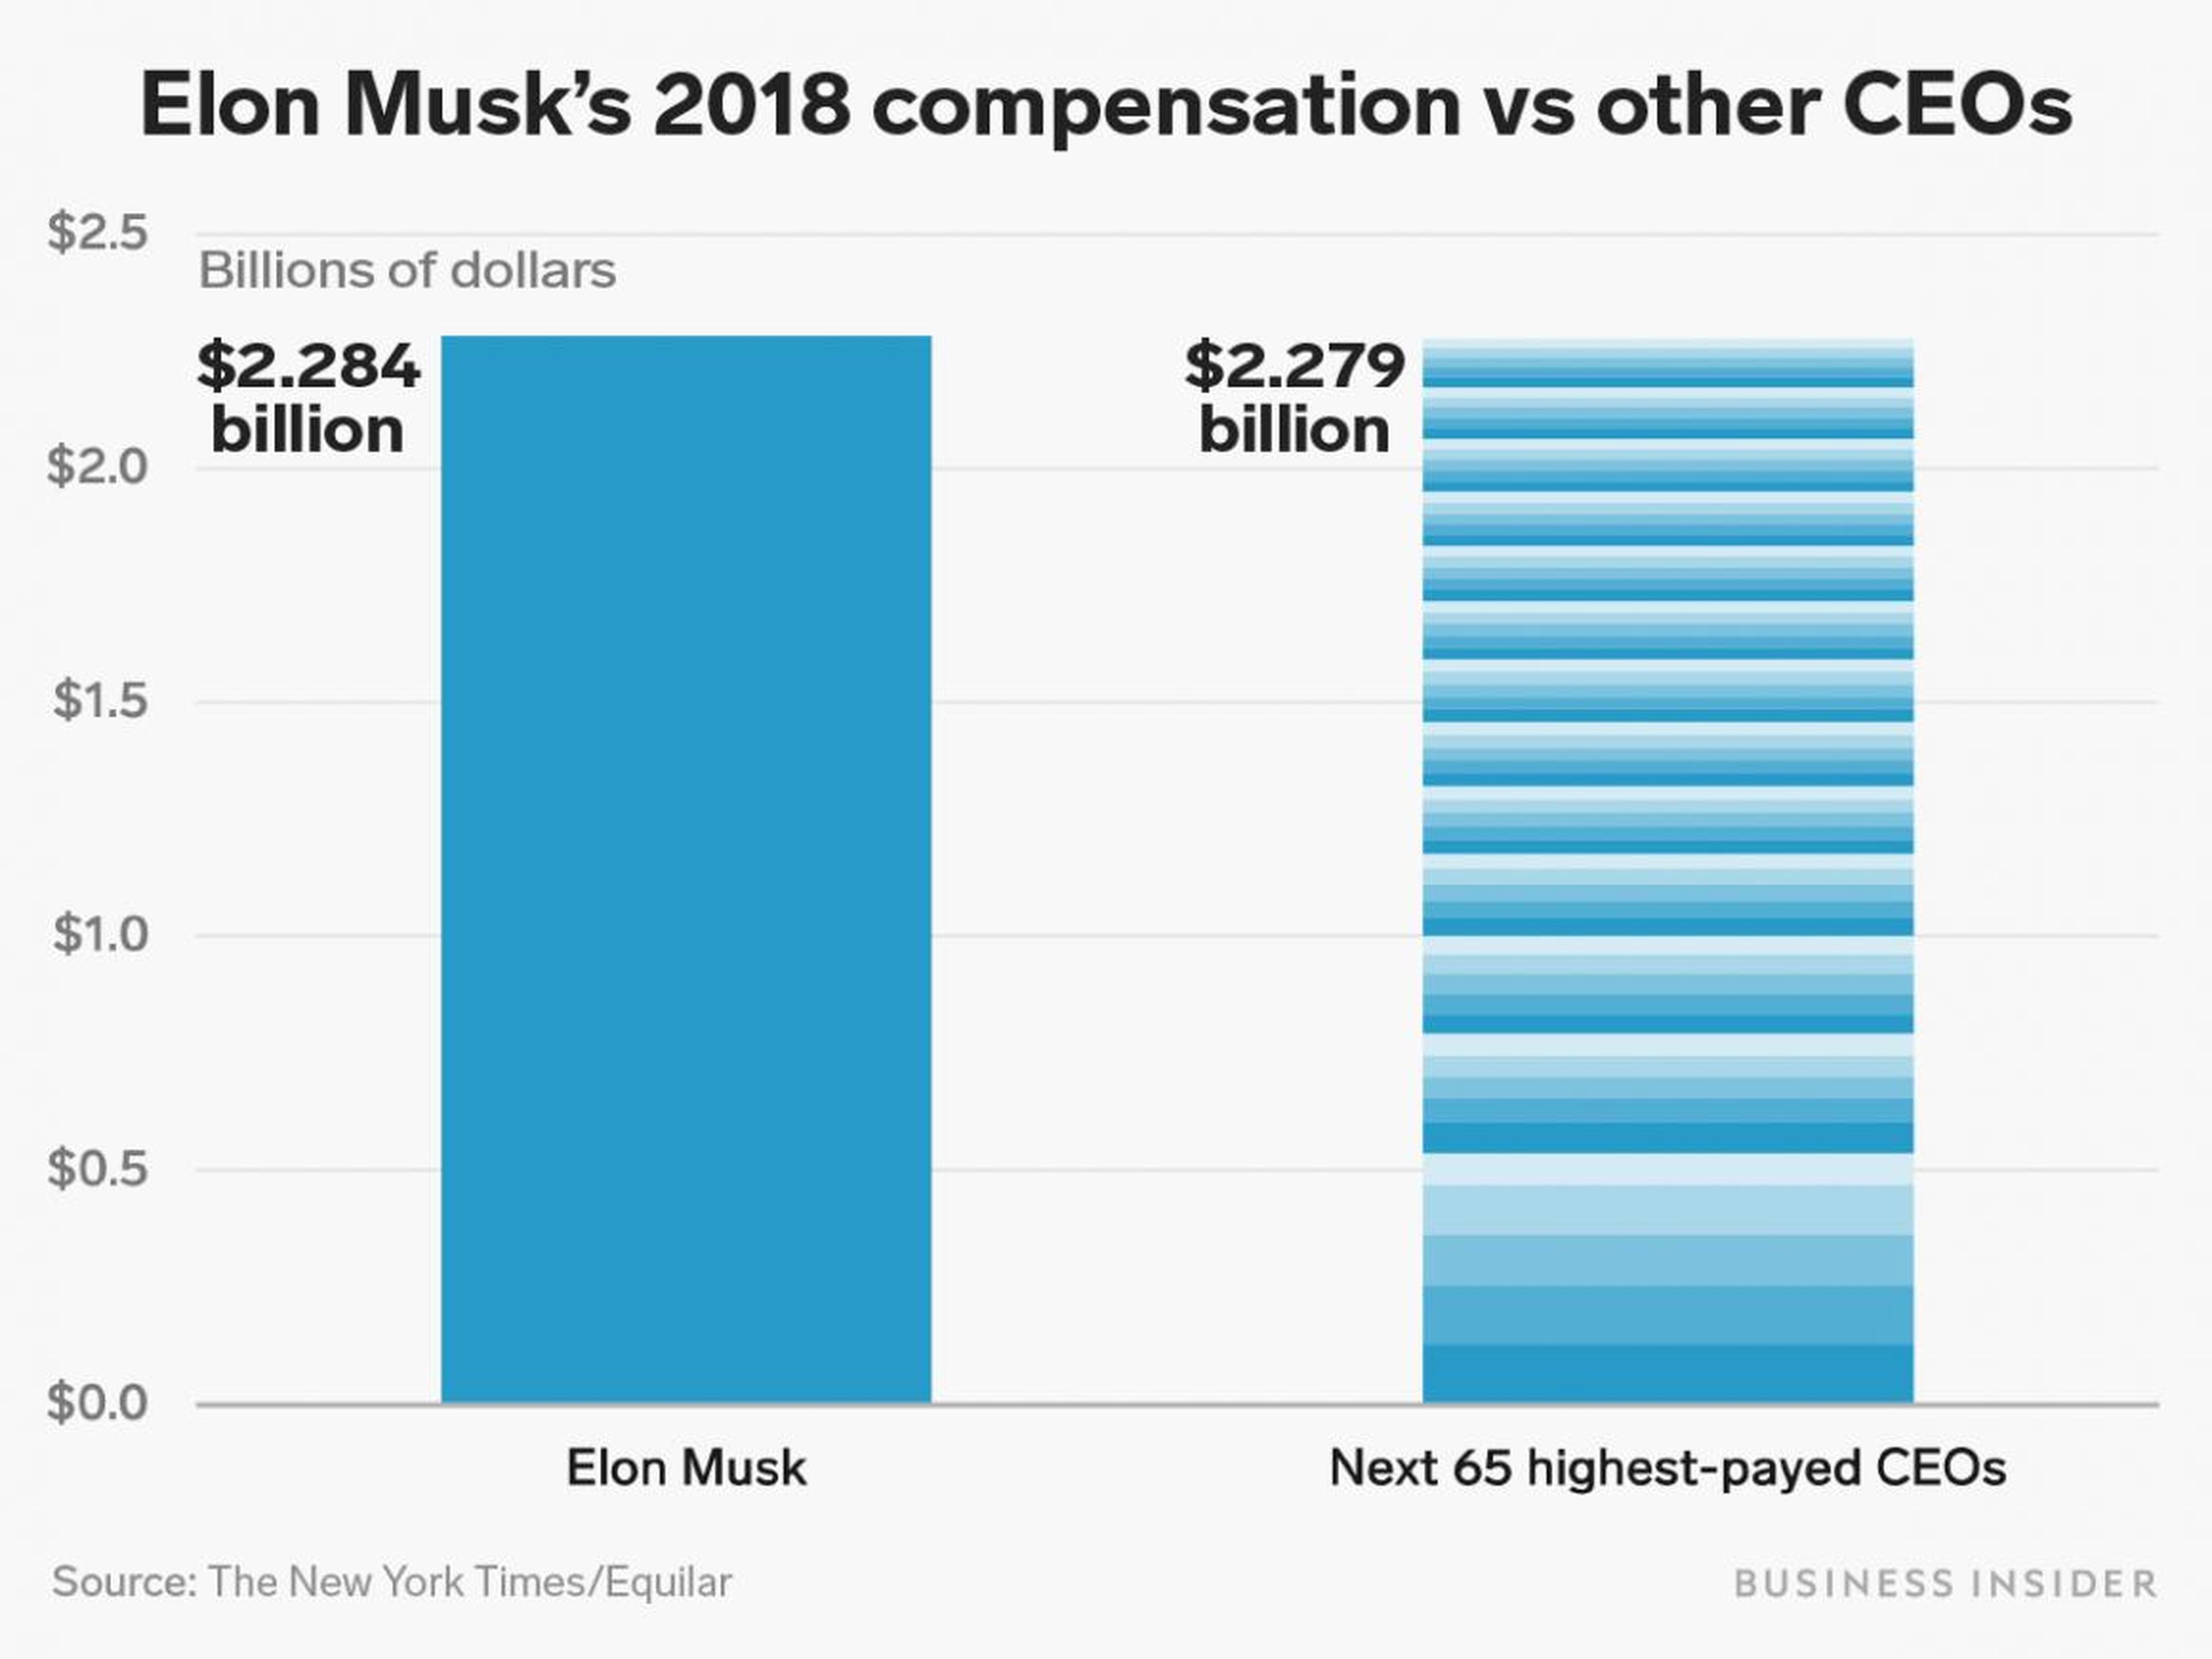 Elon Musk made more in 2018 than the next 65 highest-paid CEOs combined, according to a report